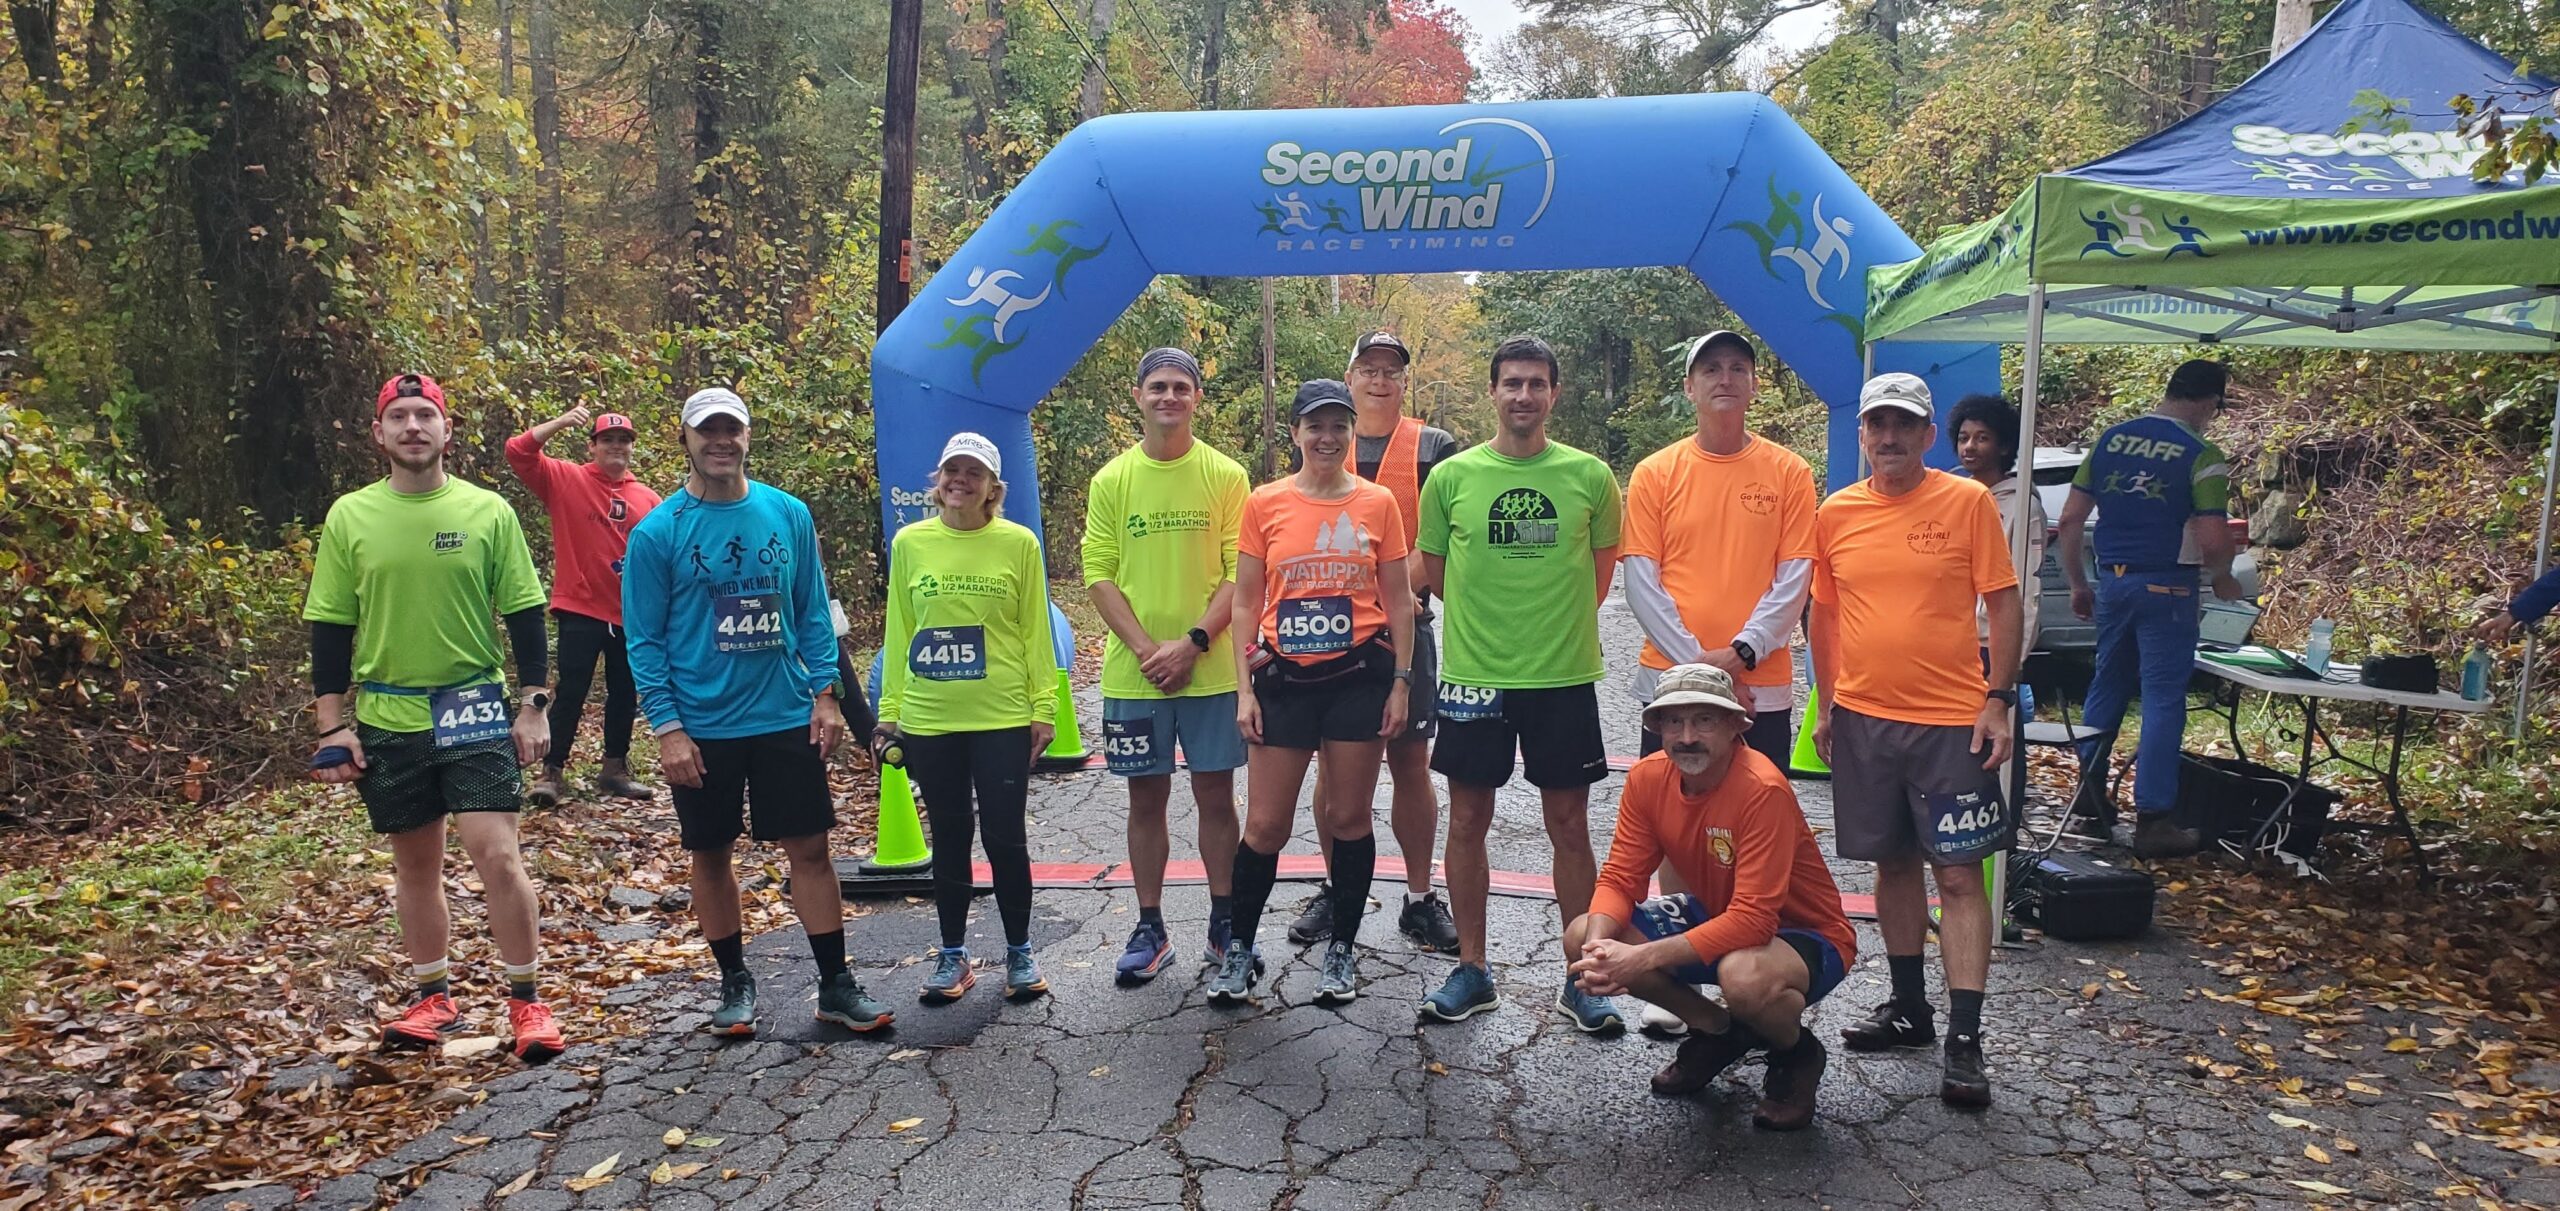 United We Move Trailfest Run. participants pose at race entrance